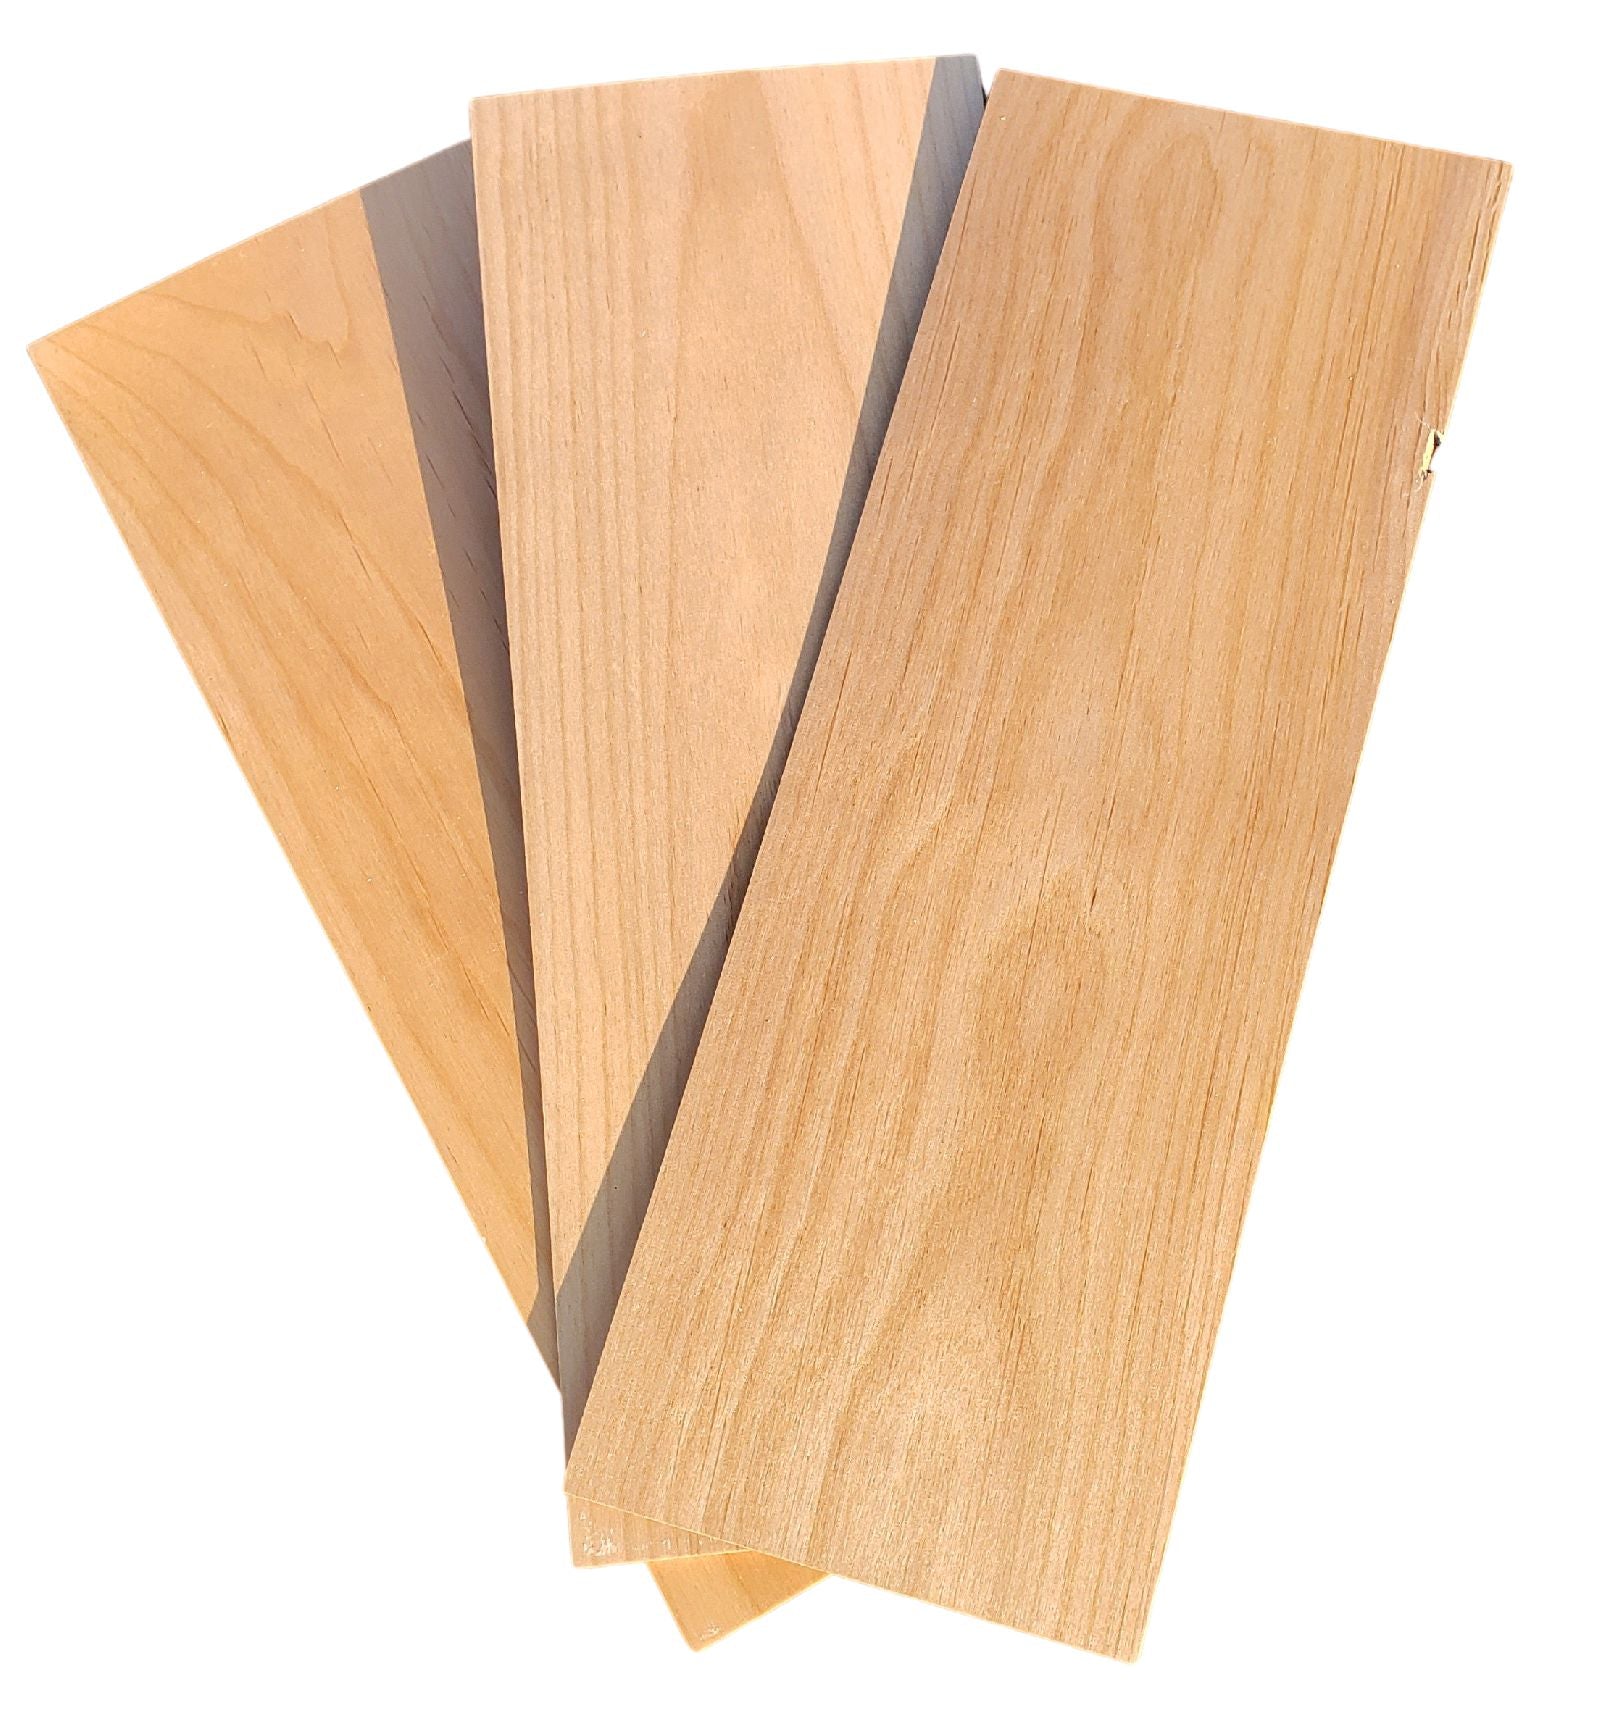 Alder Wood Strips, 1/16" thick 4.75x13.25 Pack of 10